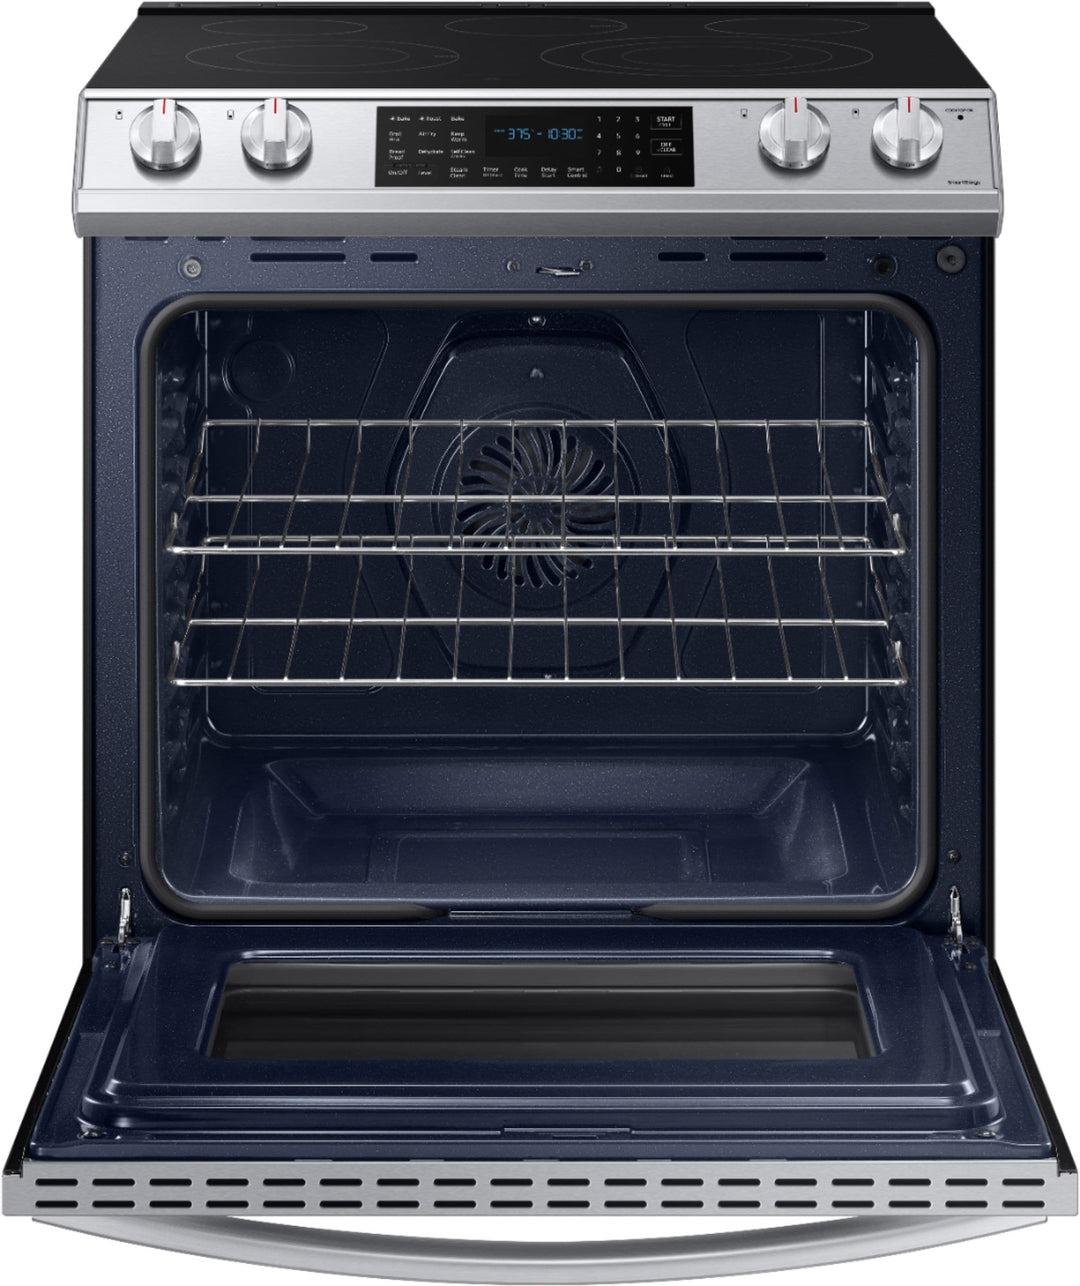 Samsung - 6.3 cu. ft. Front Control Slide-In Electric Convection Range with Air Fry & Wi-Fi, Fingerprint Resistant - Stainless steel_11